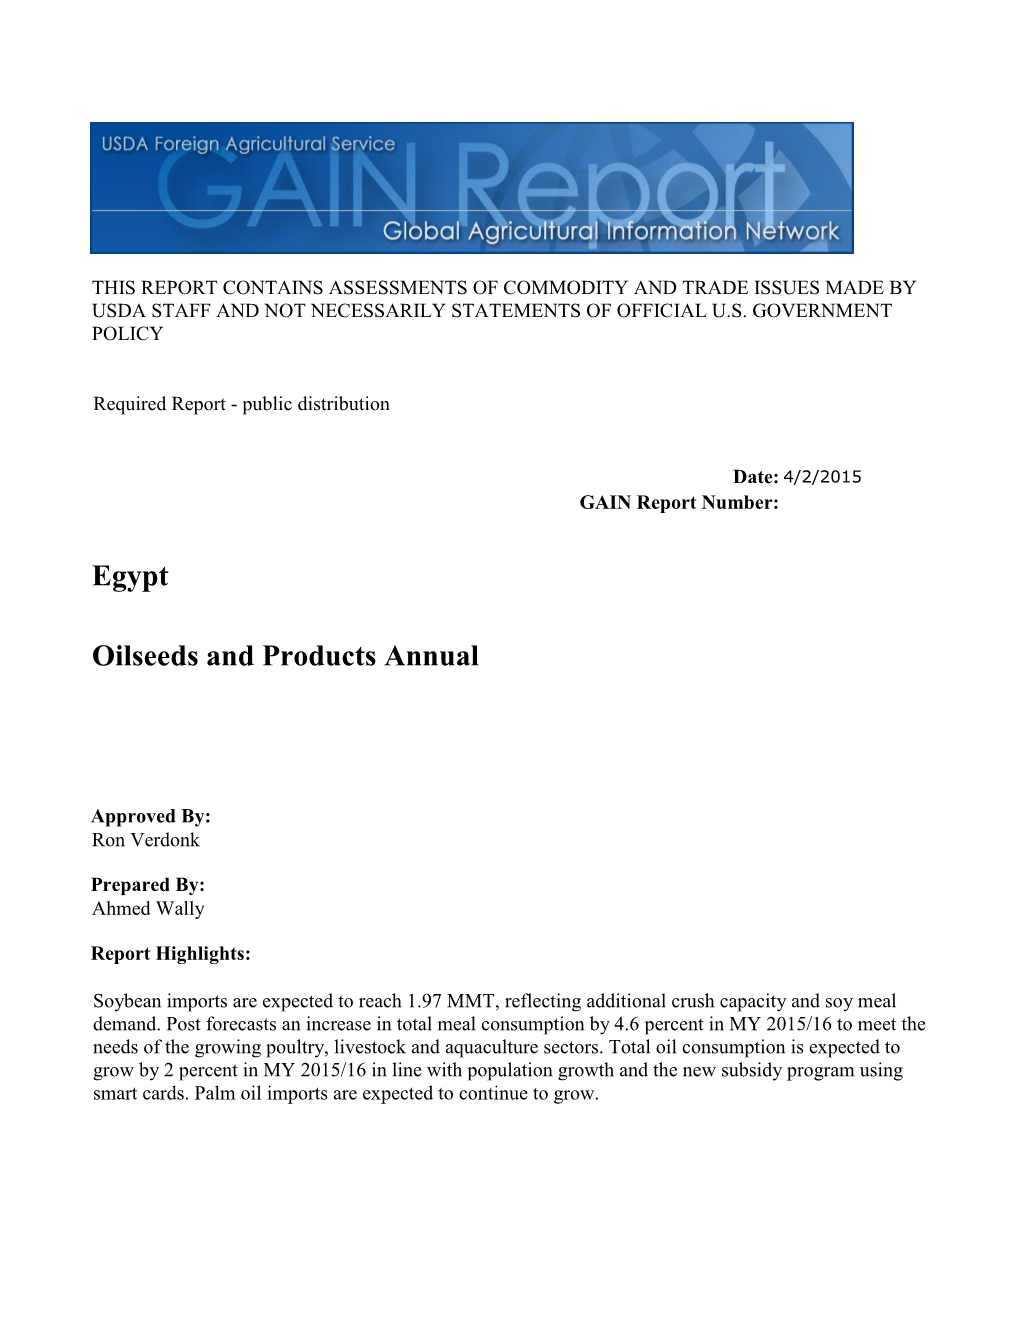 Oilseeds and Products Annual Egypt